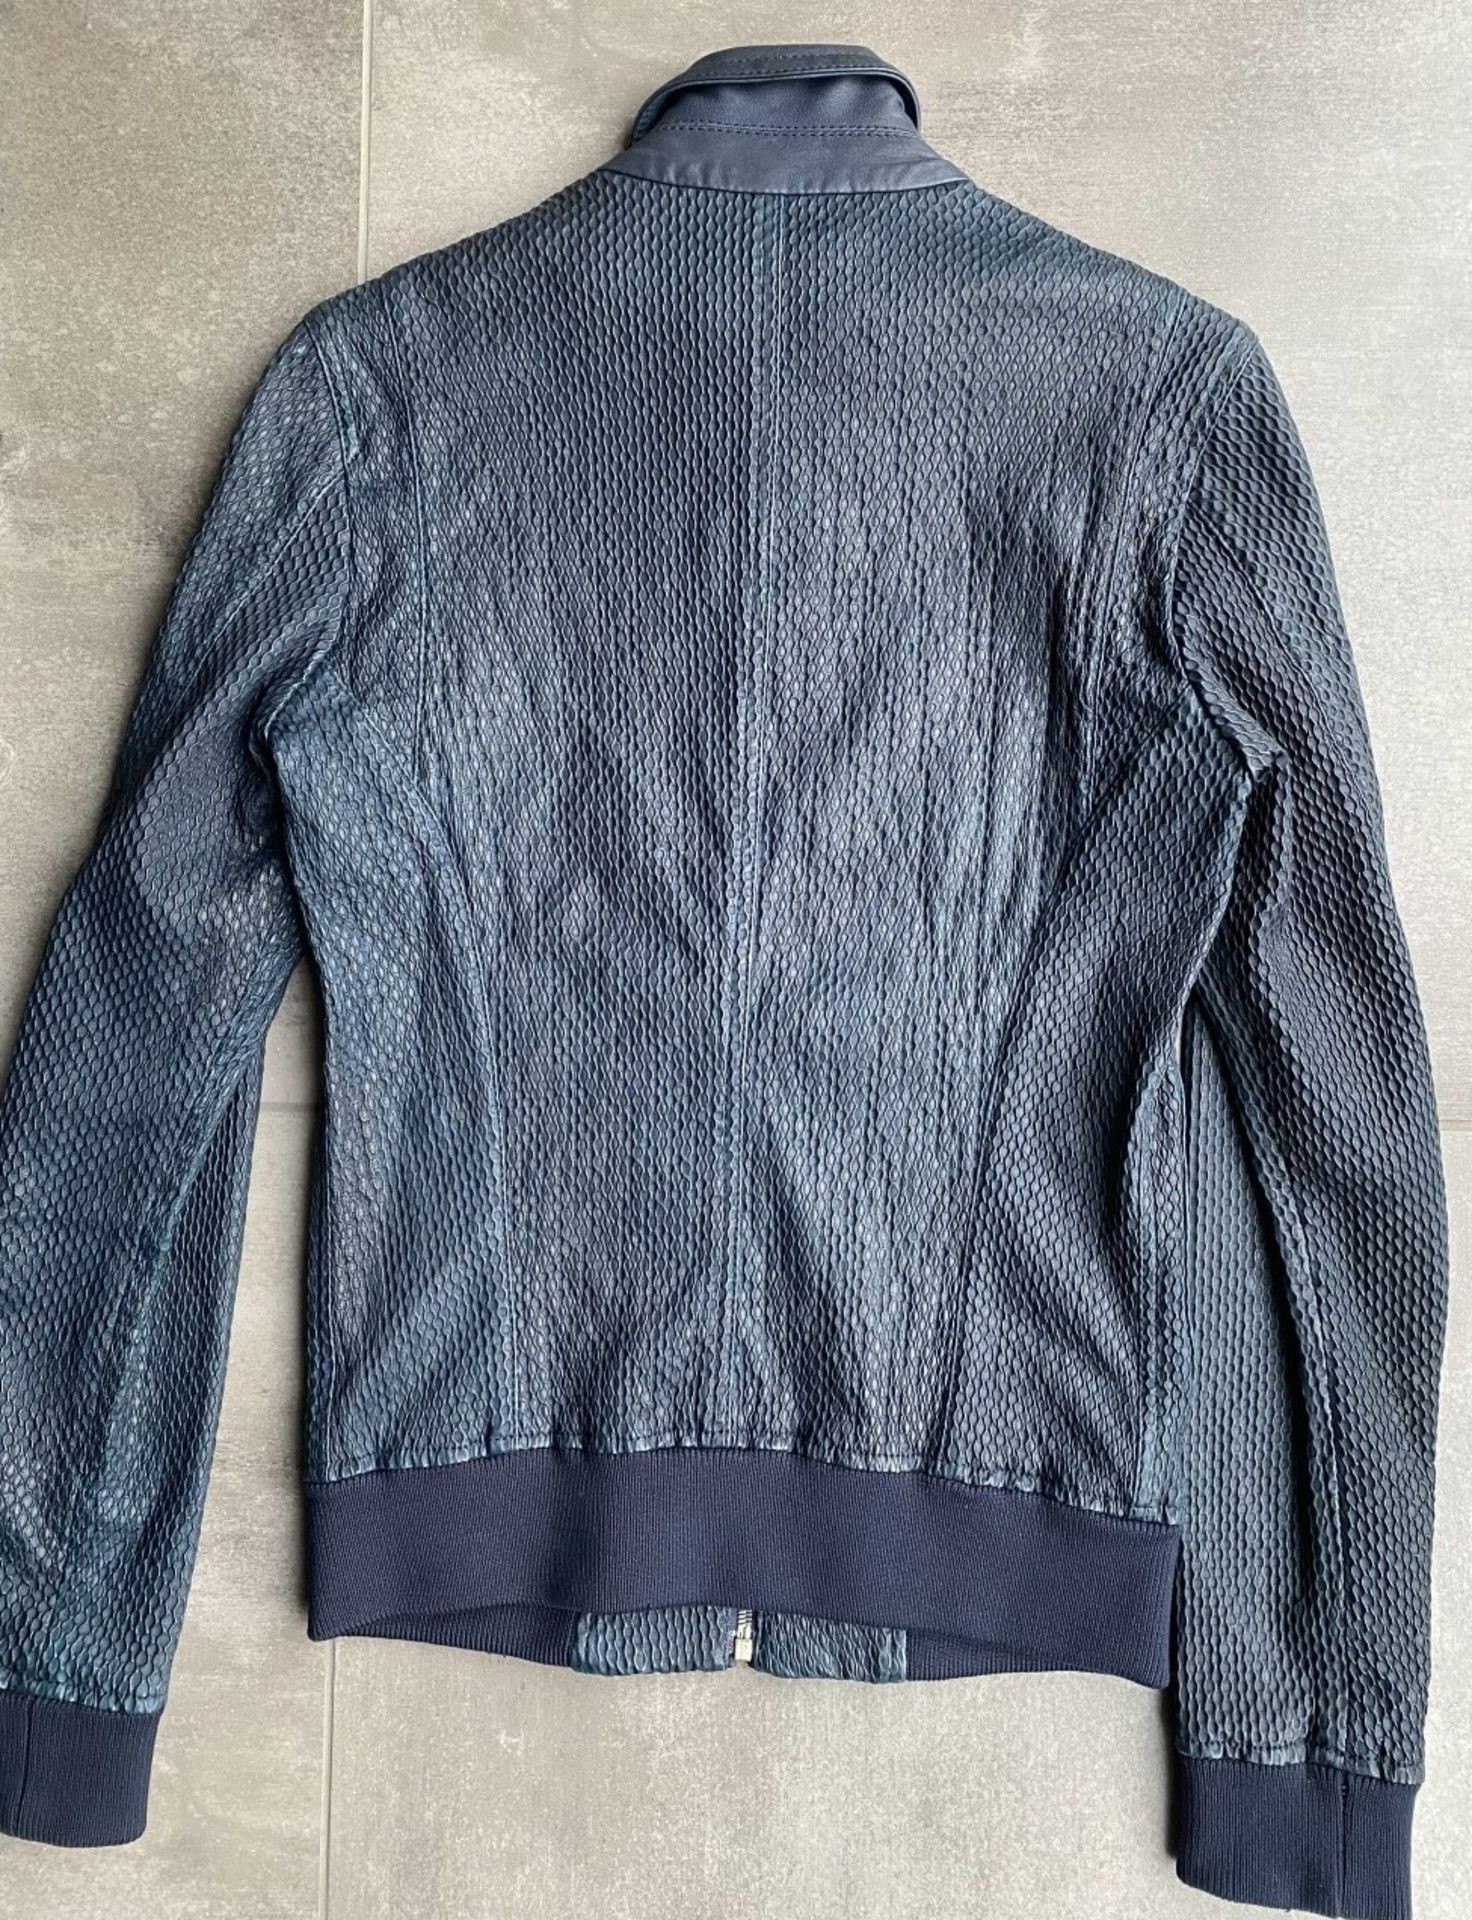 1 x Men's Genuine Dolce & Gabbana Bomber Jacket In Navy - Size: 46 - Preowned In Very Good Condition - Image 8 of 9